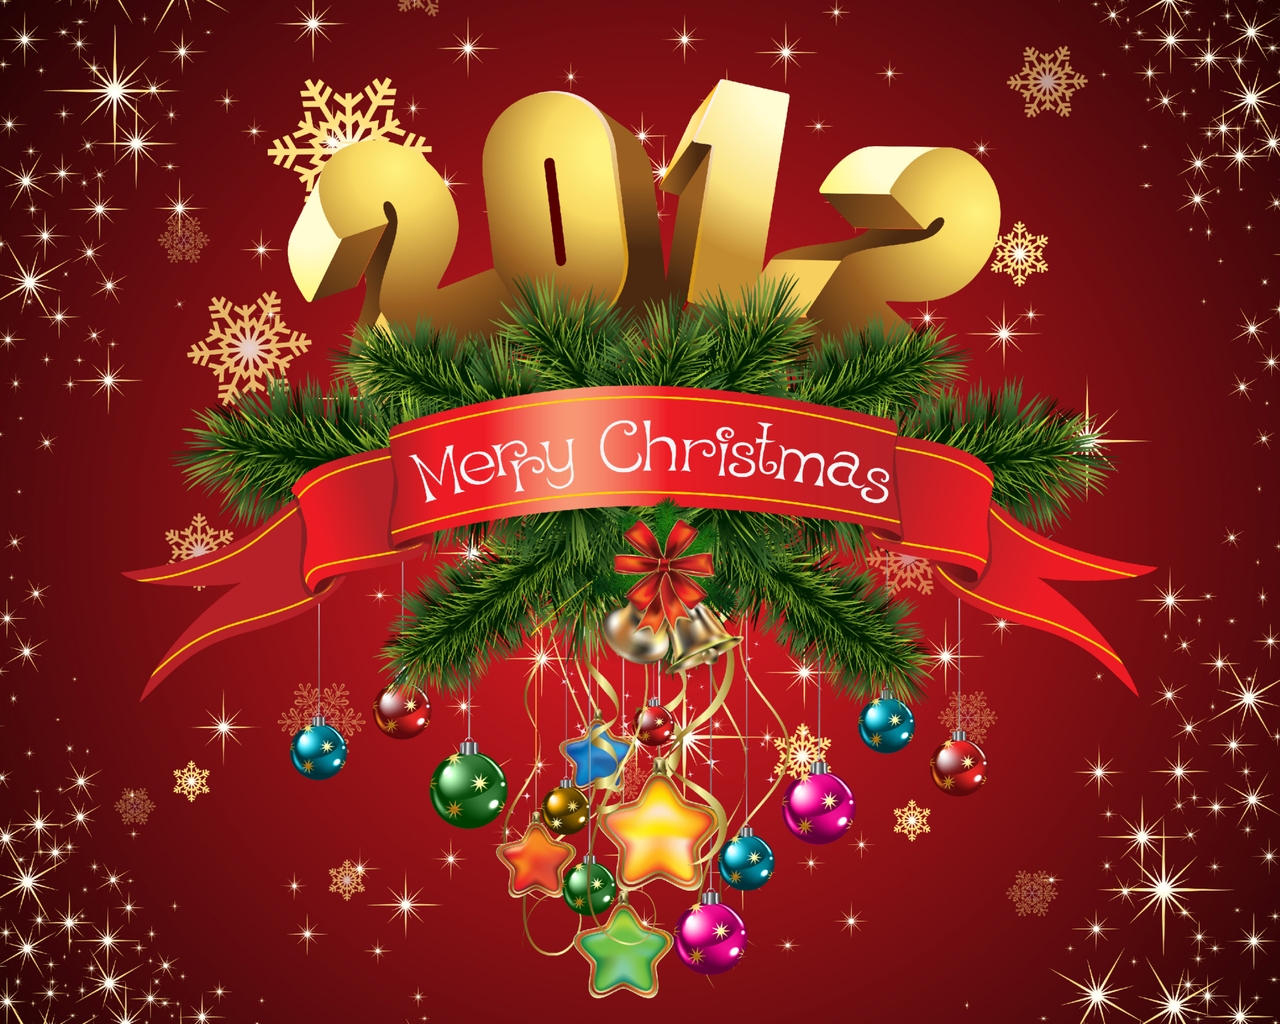 Merry Christmas 2012 for 1280 x 1024 resolution